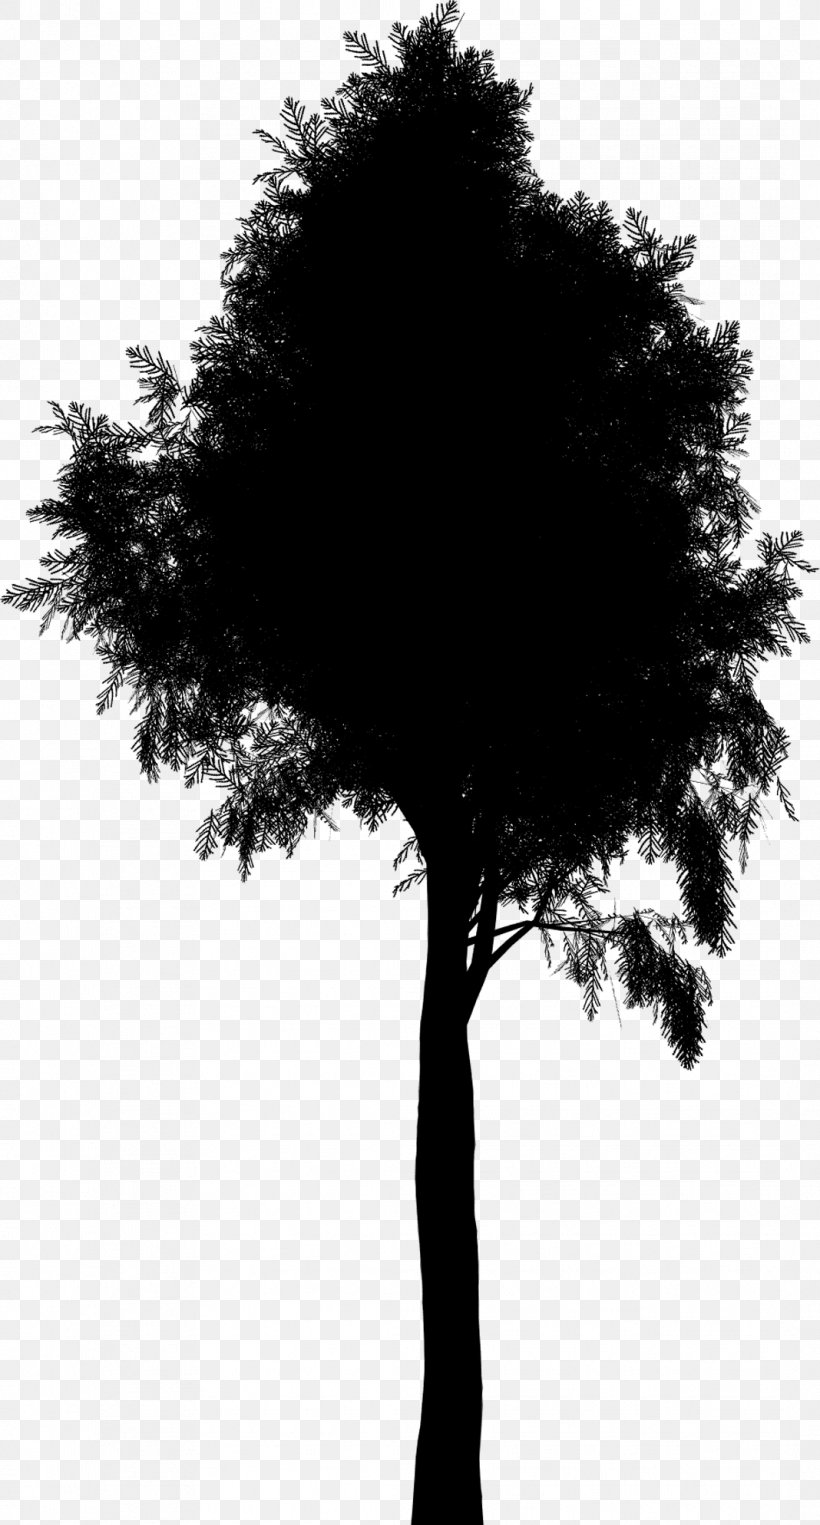 Silhouette Leaf Branching, PNG, 1068x1987px, Silhouette, Blackandwhite, Branch, Branching, Leaf Download Free